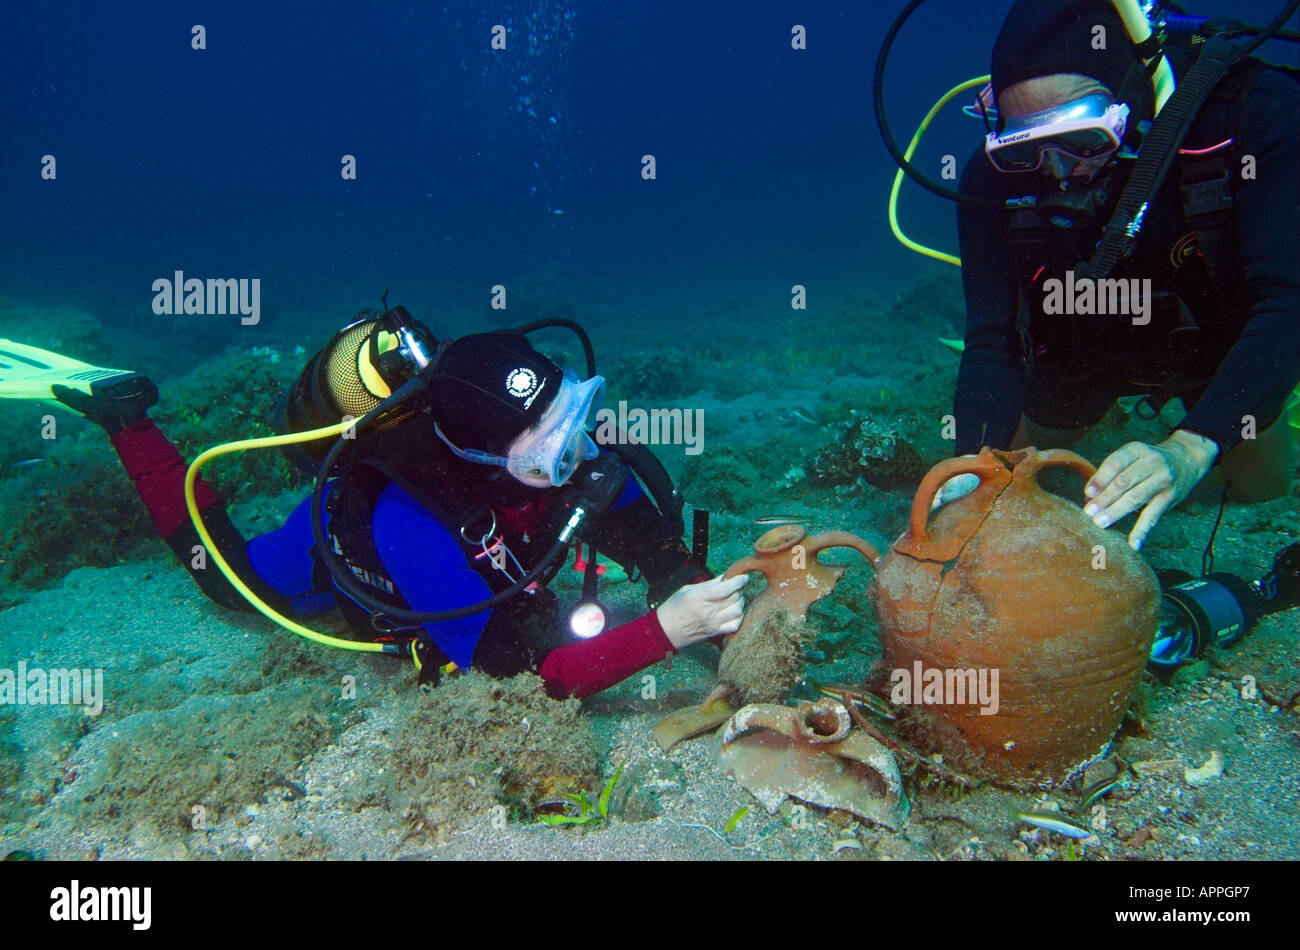 Divers holding and examining amphora from ancient shipwreck at Paros Island Greece Stock Photo